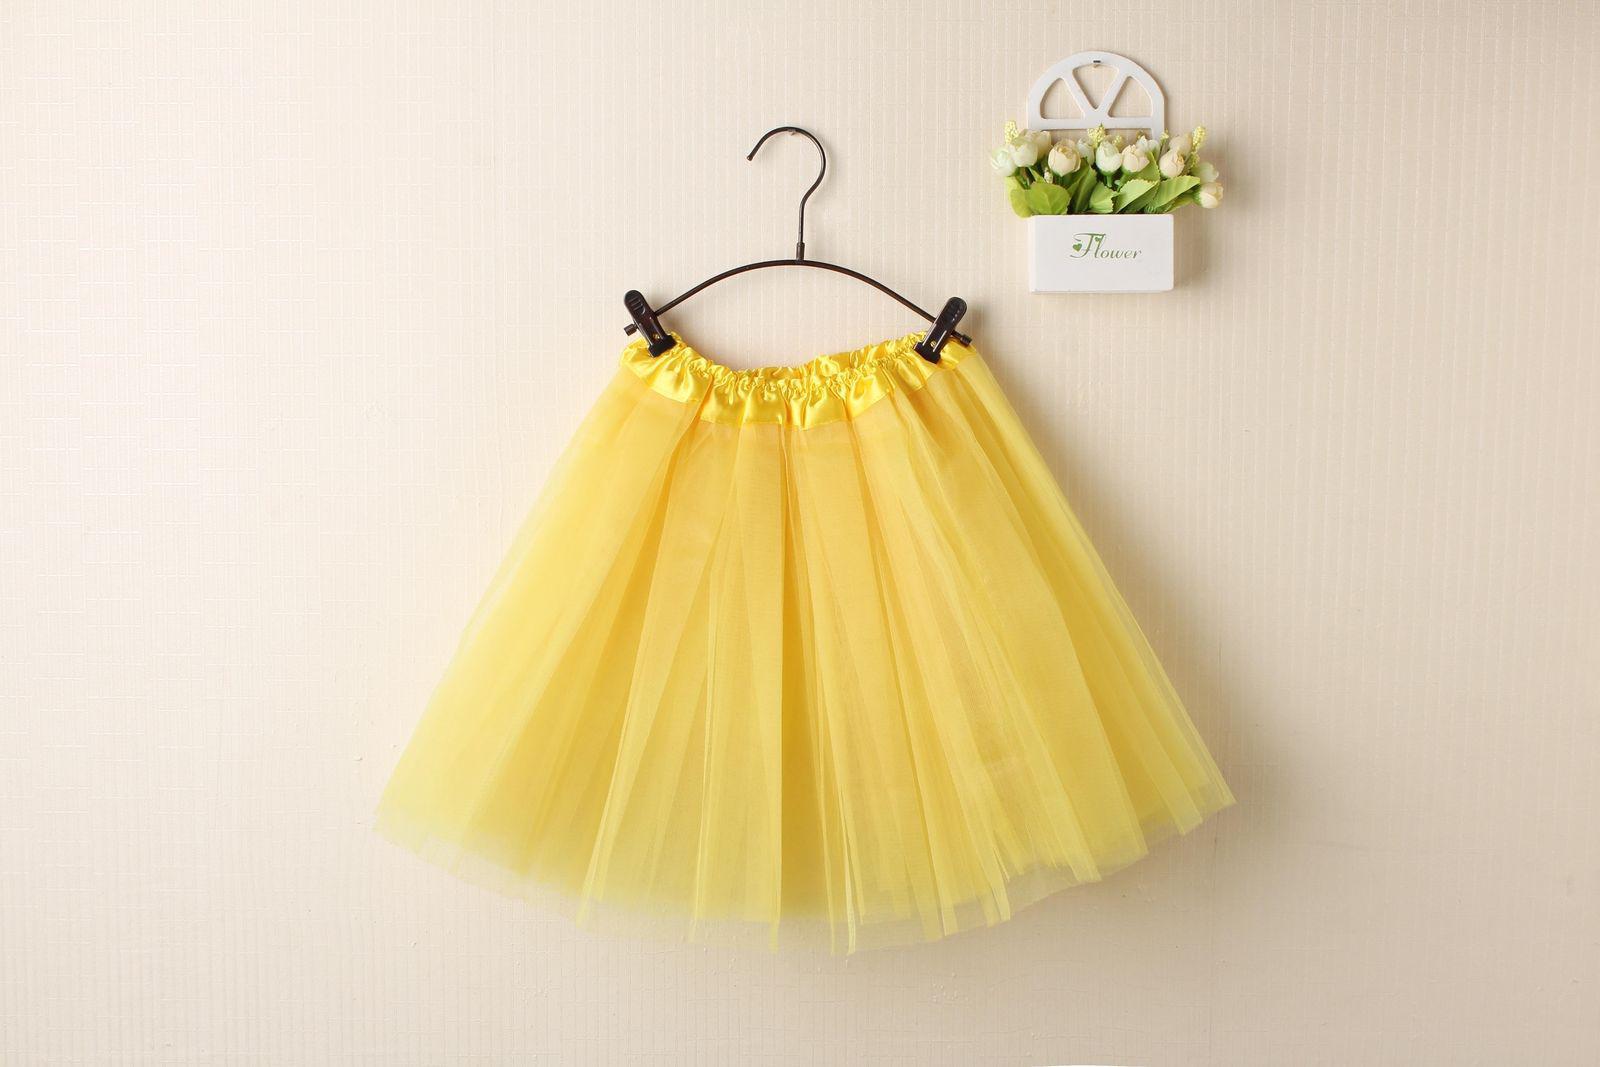 New Adults Tulle Tutu Skirt Dressup Party Costume Ballet Womens Girls Dance Wear - Yellow (Size: Kids)